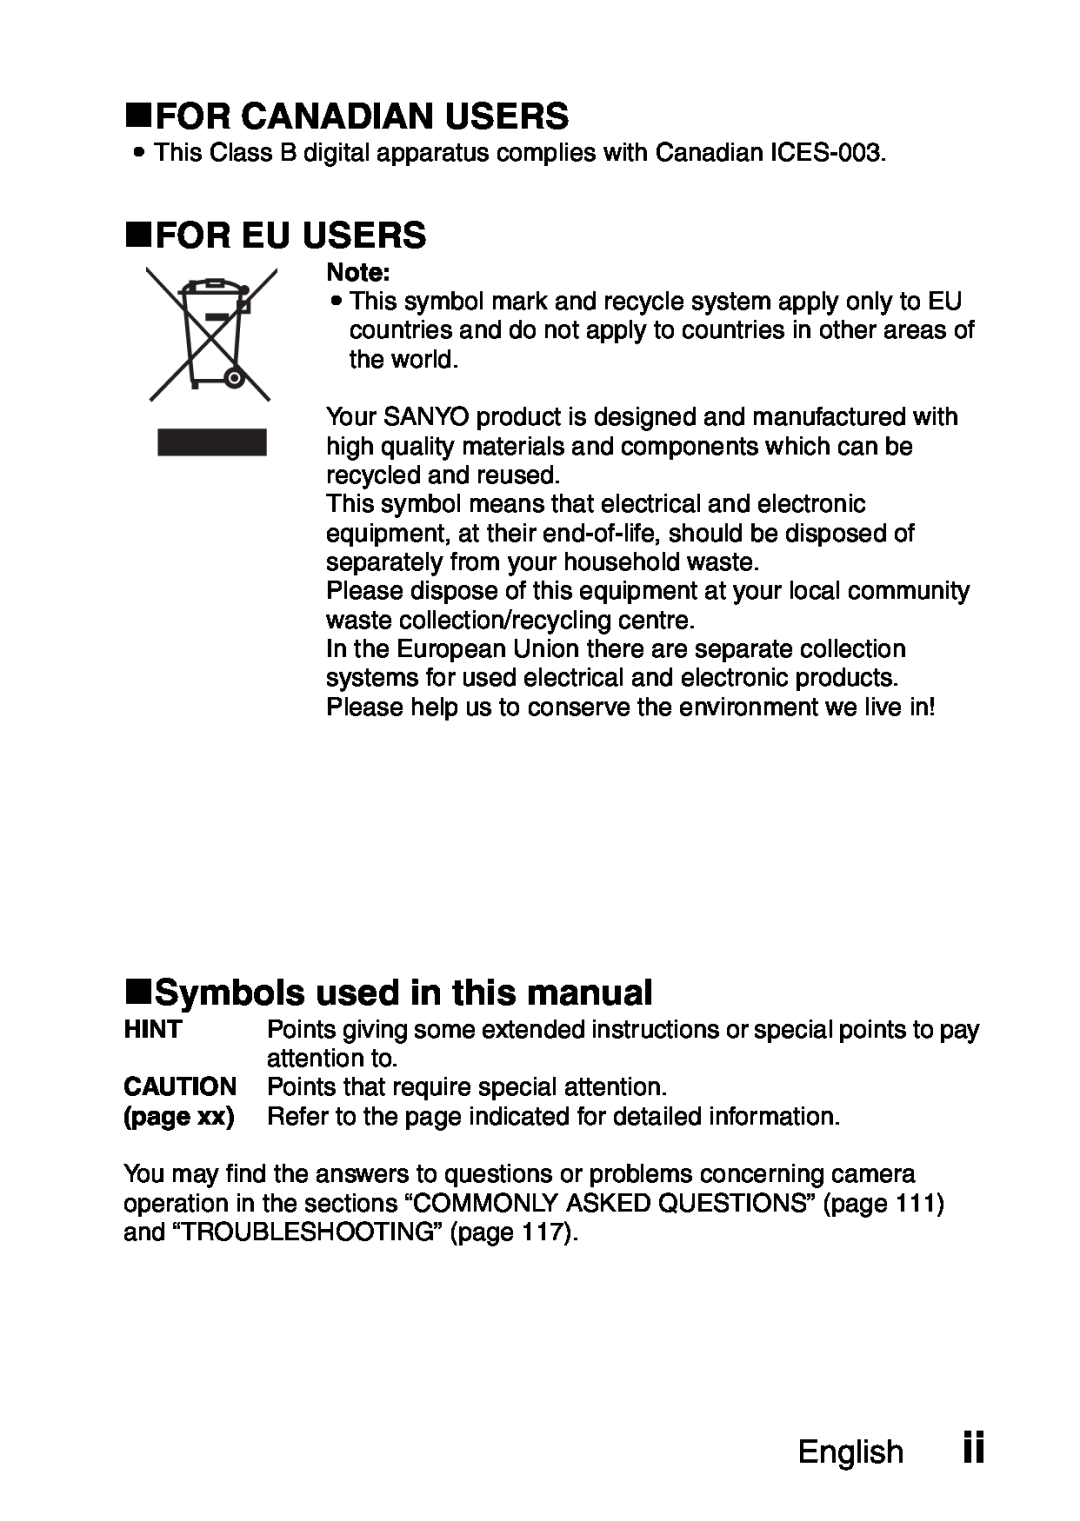 Sanyo VPC-S60 kFOR CANADIAN USERS, kFOR EU USERS, kSymbols used in this manual, English, Hint, attention to, page 